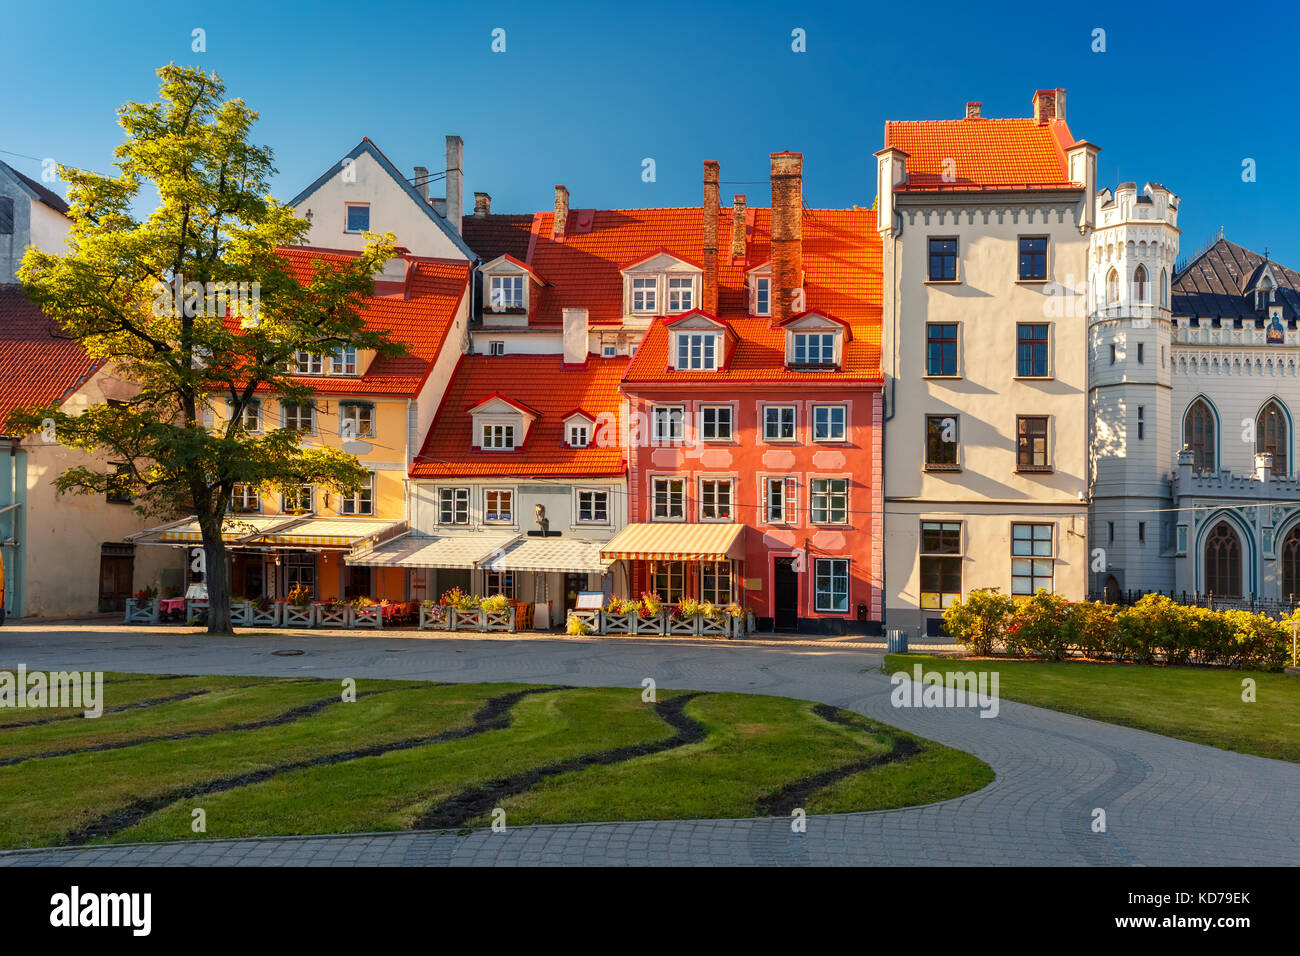 City square in the Old Town of Riga, Latvia Stock Photo